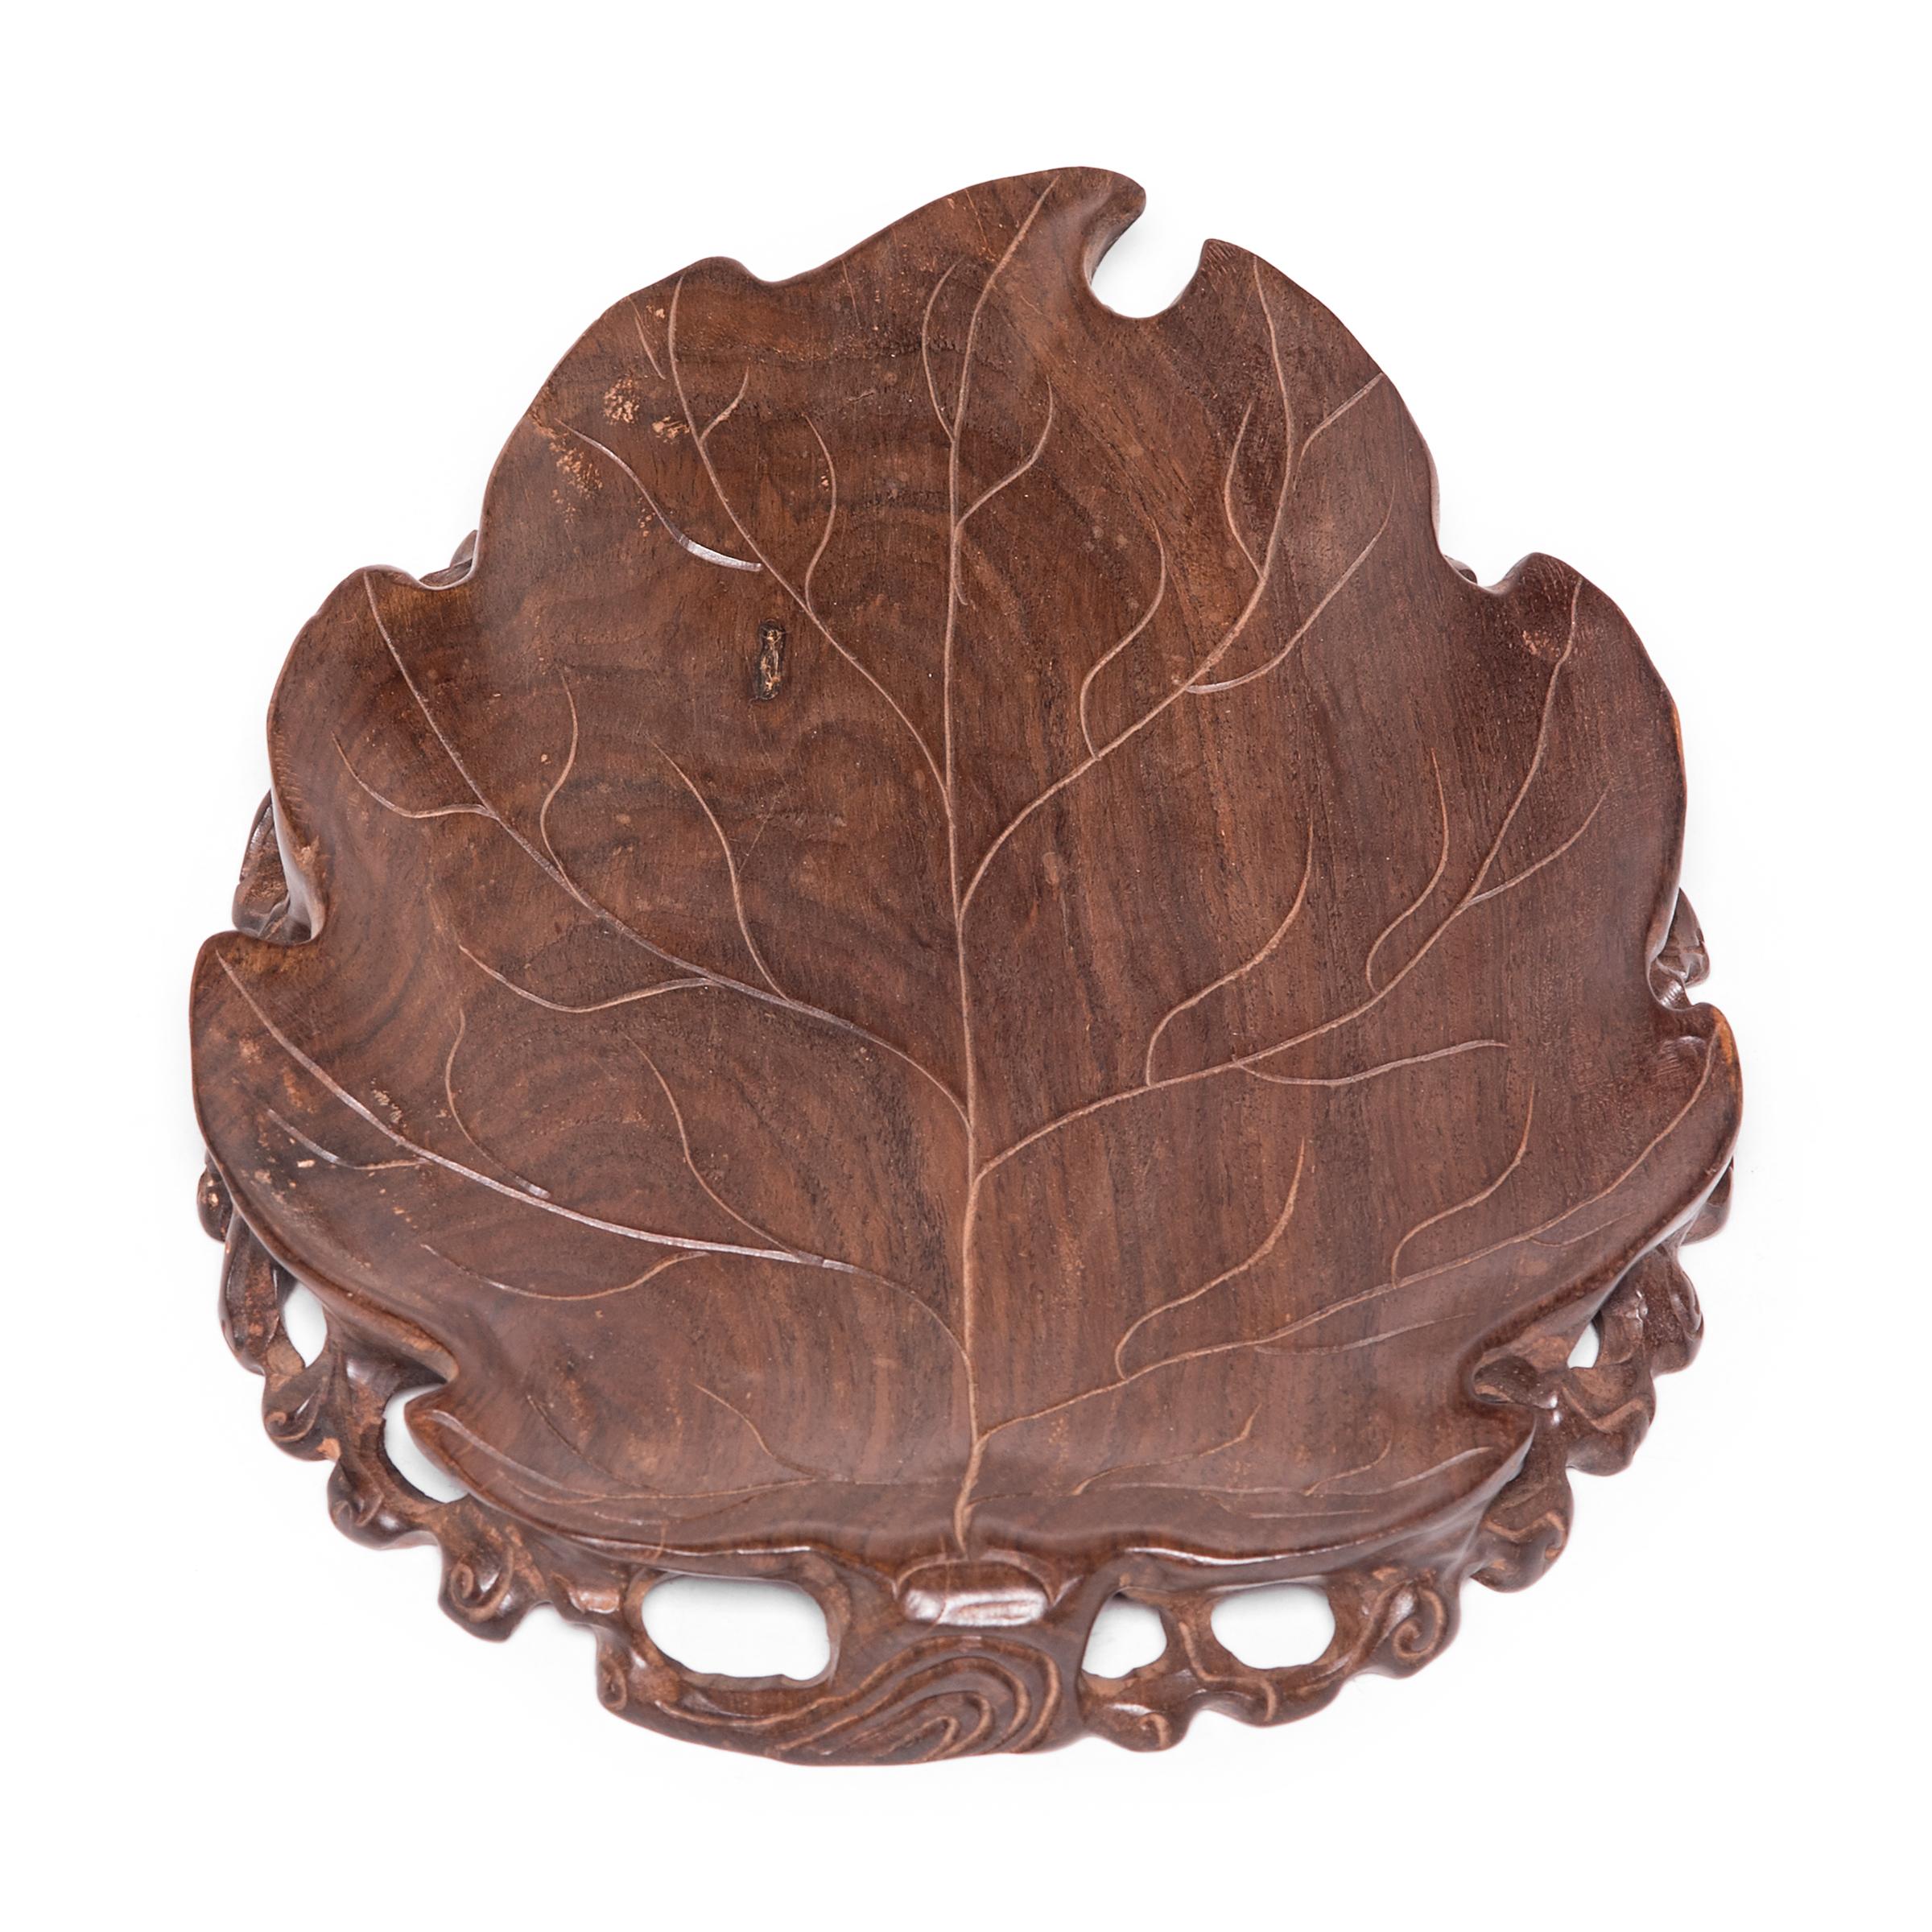 Beautifully hand carved of a fine hardwood, this early 20th century plate once held precious objects or scholar's implements in an artist's studio. Prized for its rich color and fine grain, the wood is on full display in this exquisite tray, a work